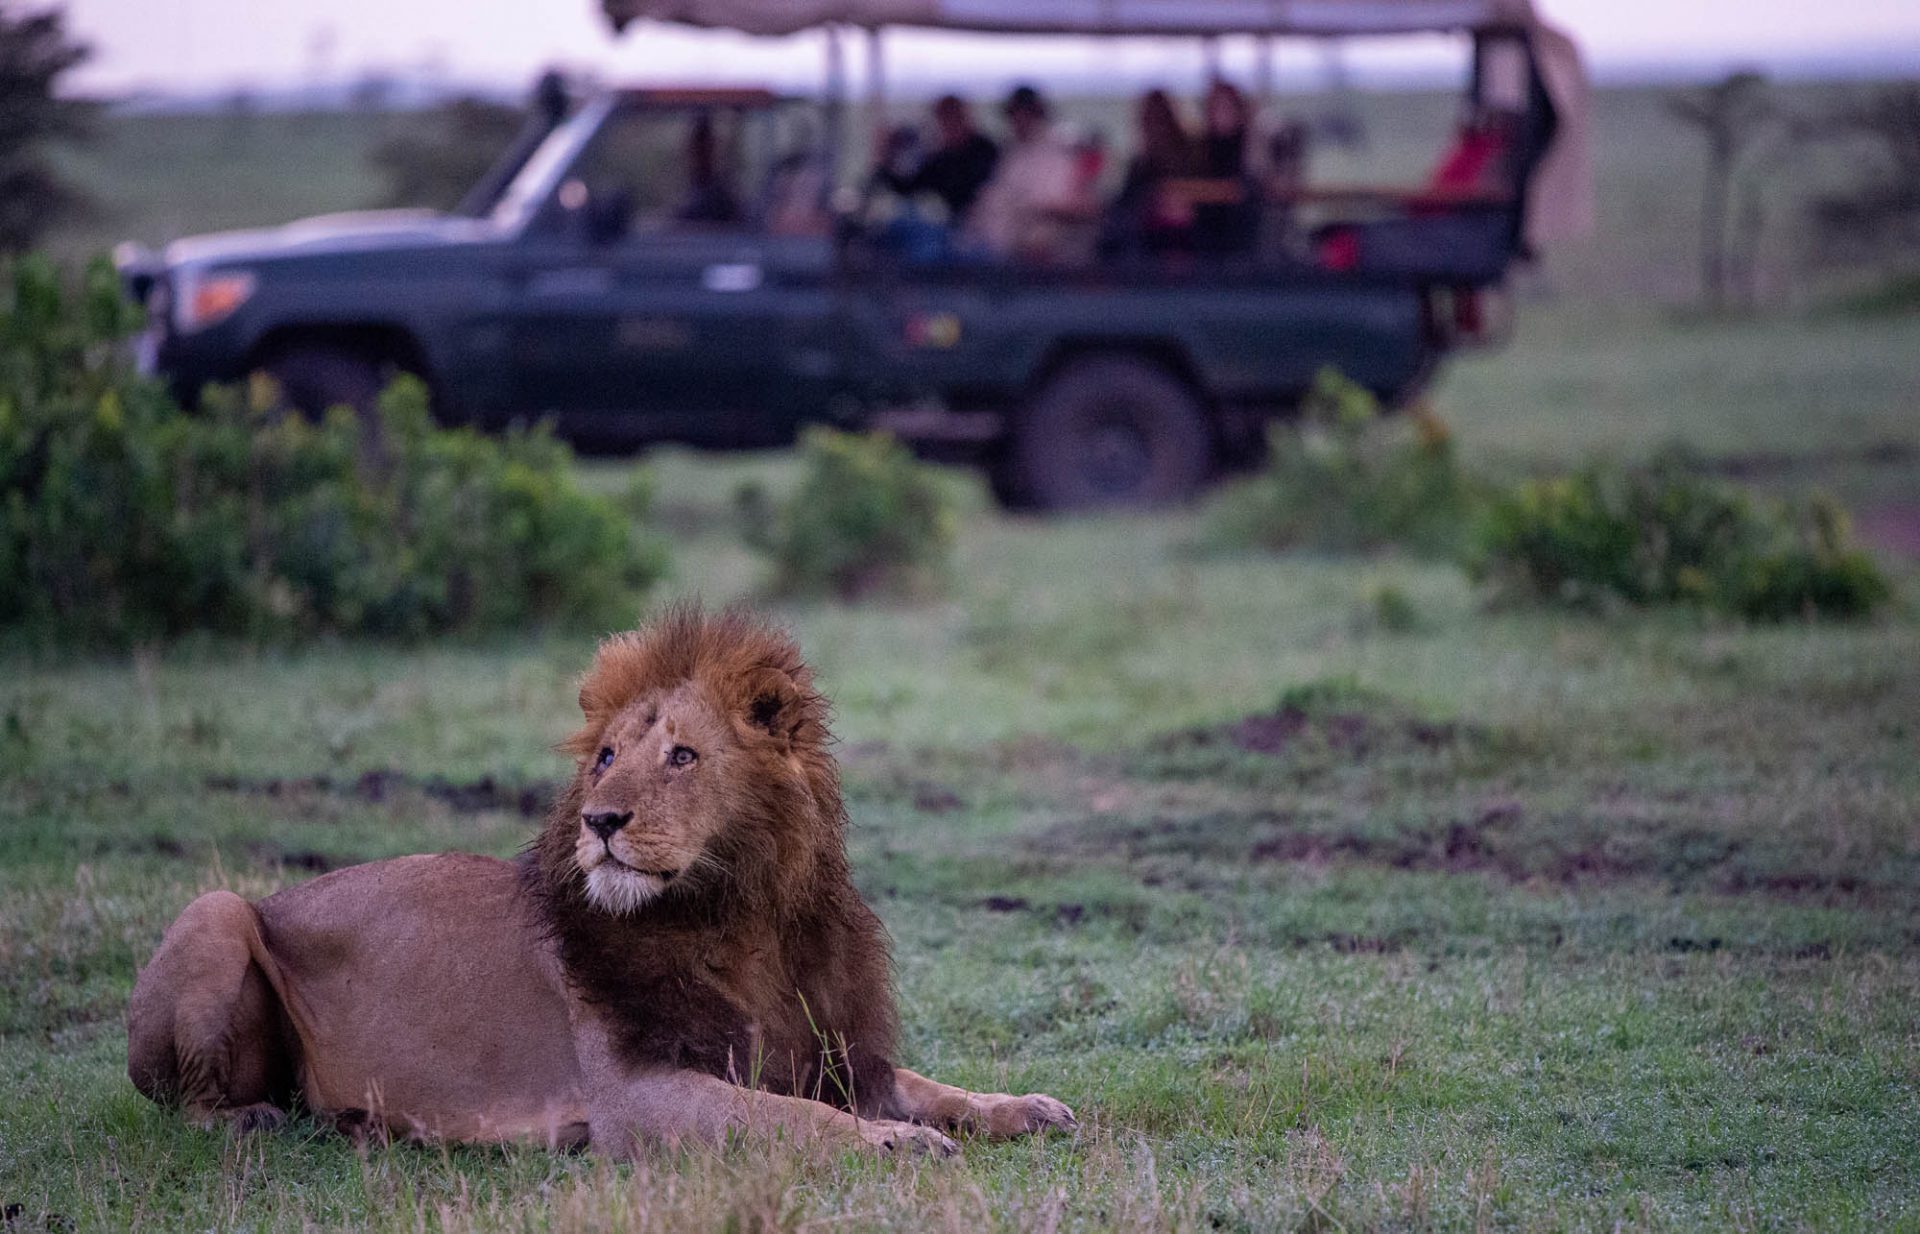 How to book a better safari